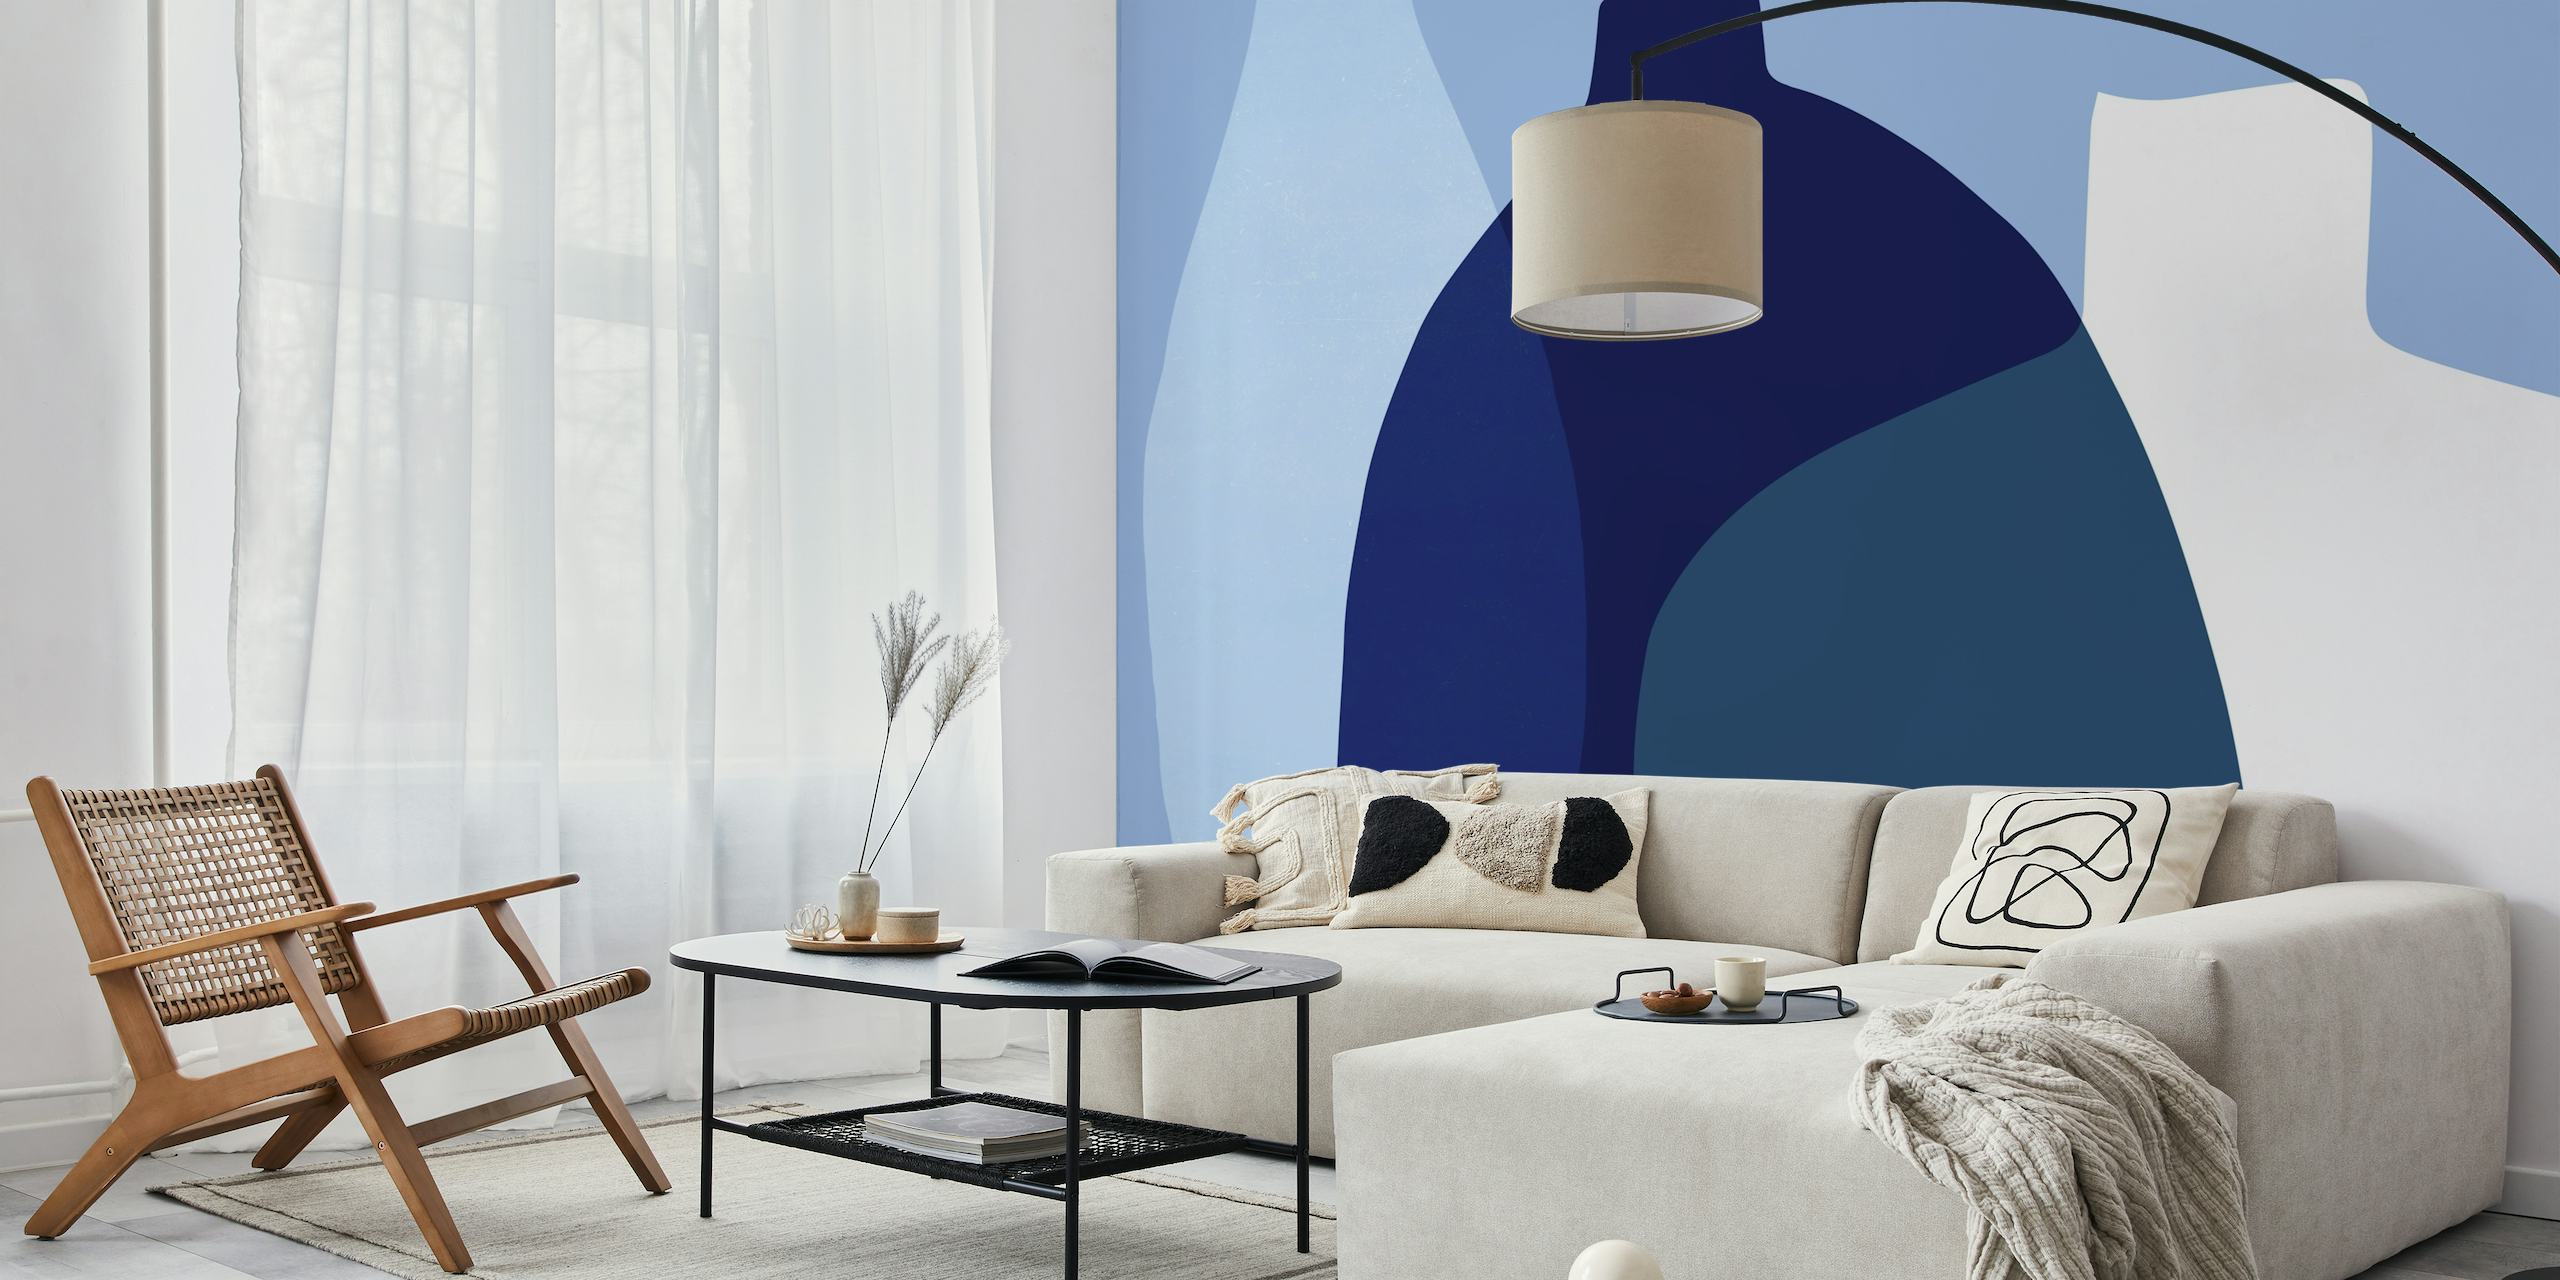 Abstract Glass Vases wall mural with overlapping shapes in shades of blue and neutral colors